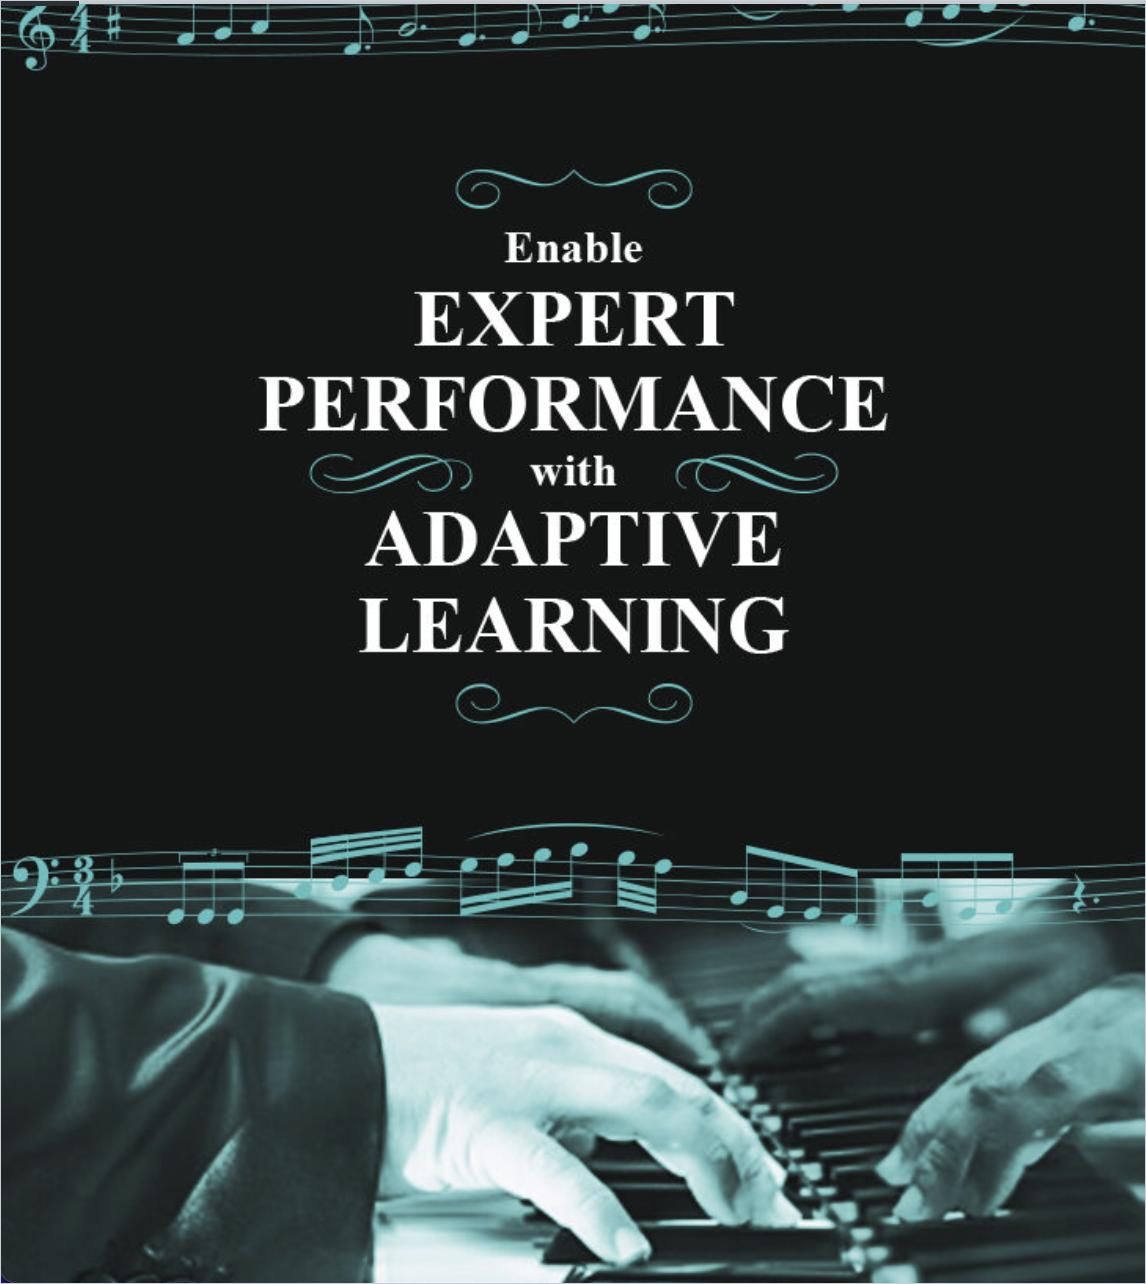 Image of: Enable Expert Performance with Adaptive Learning